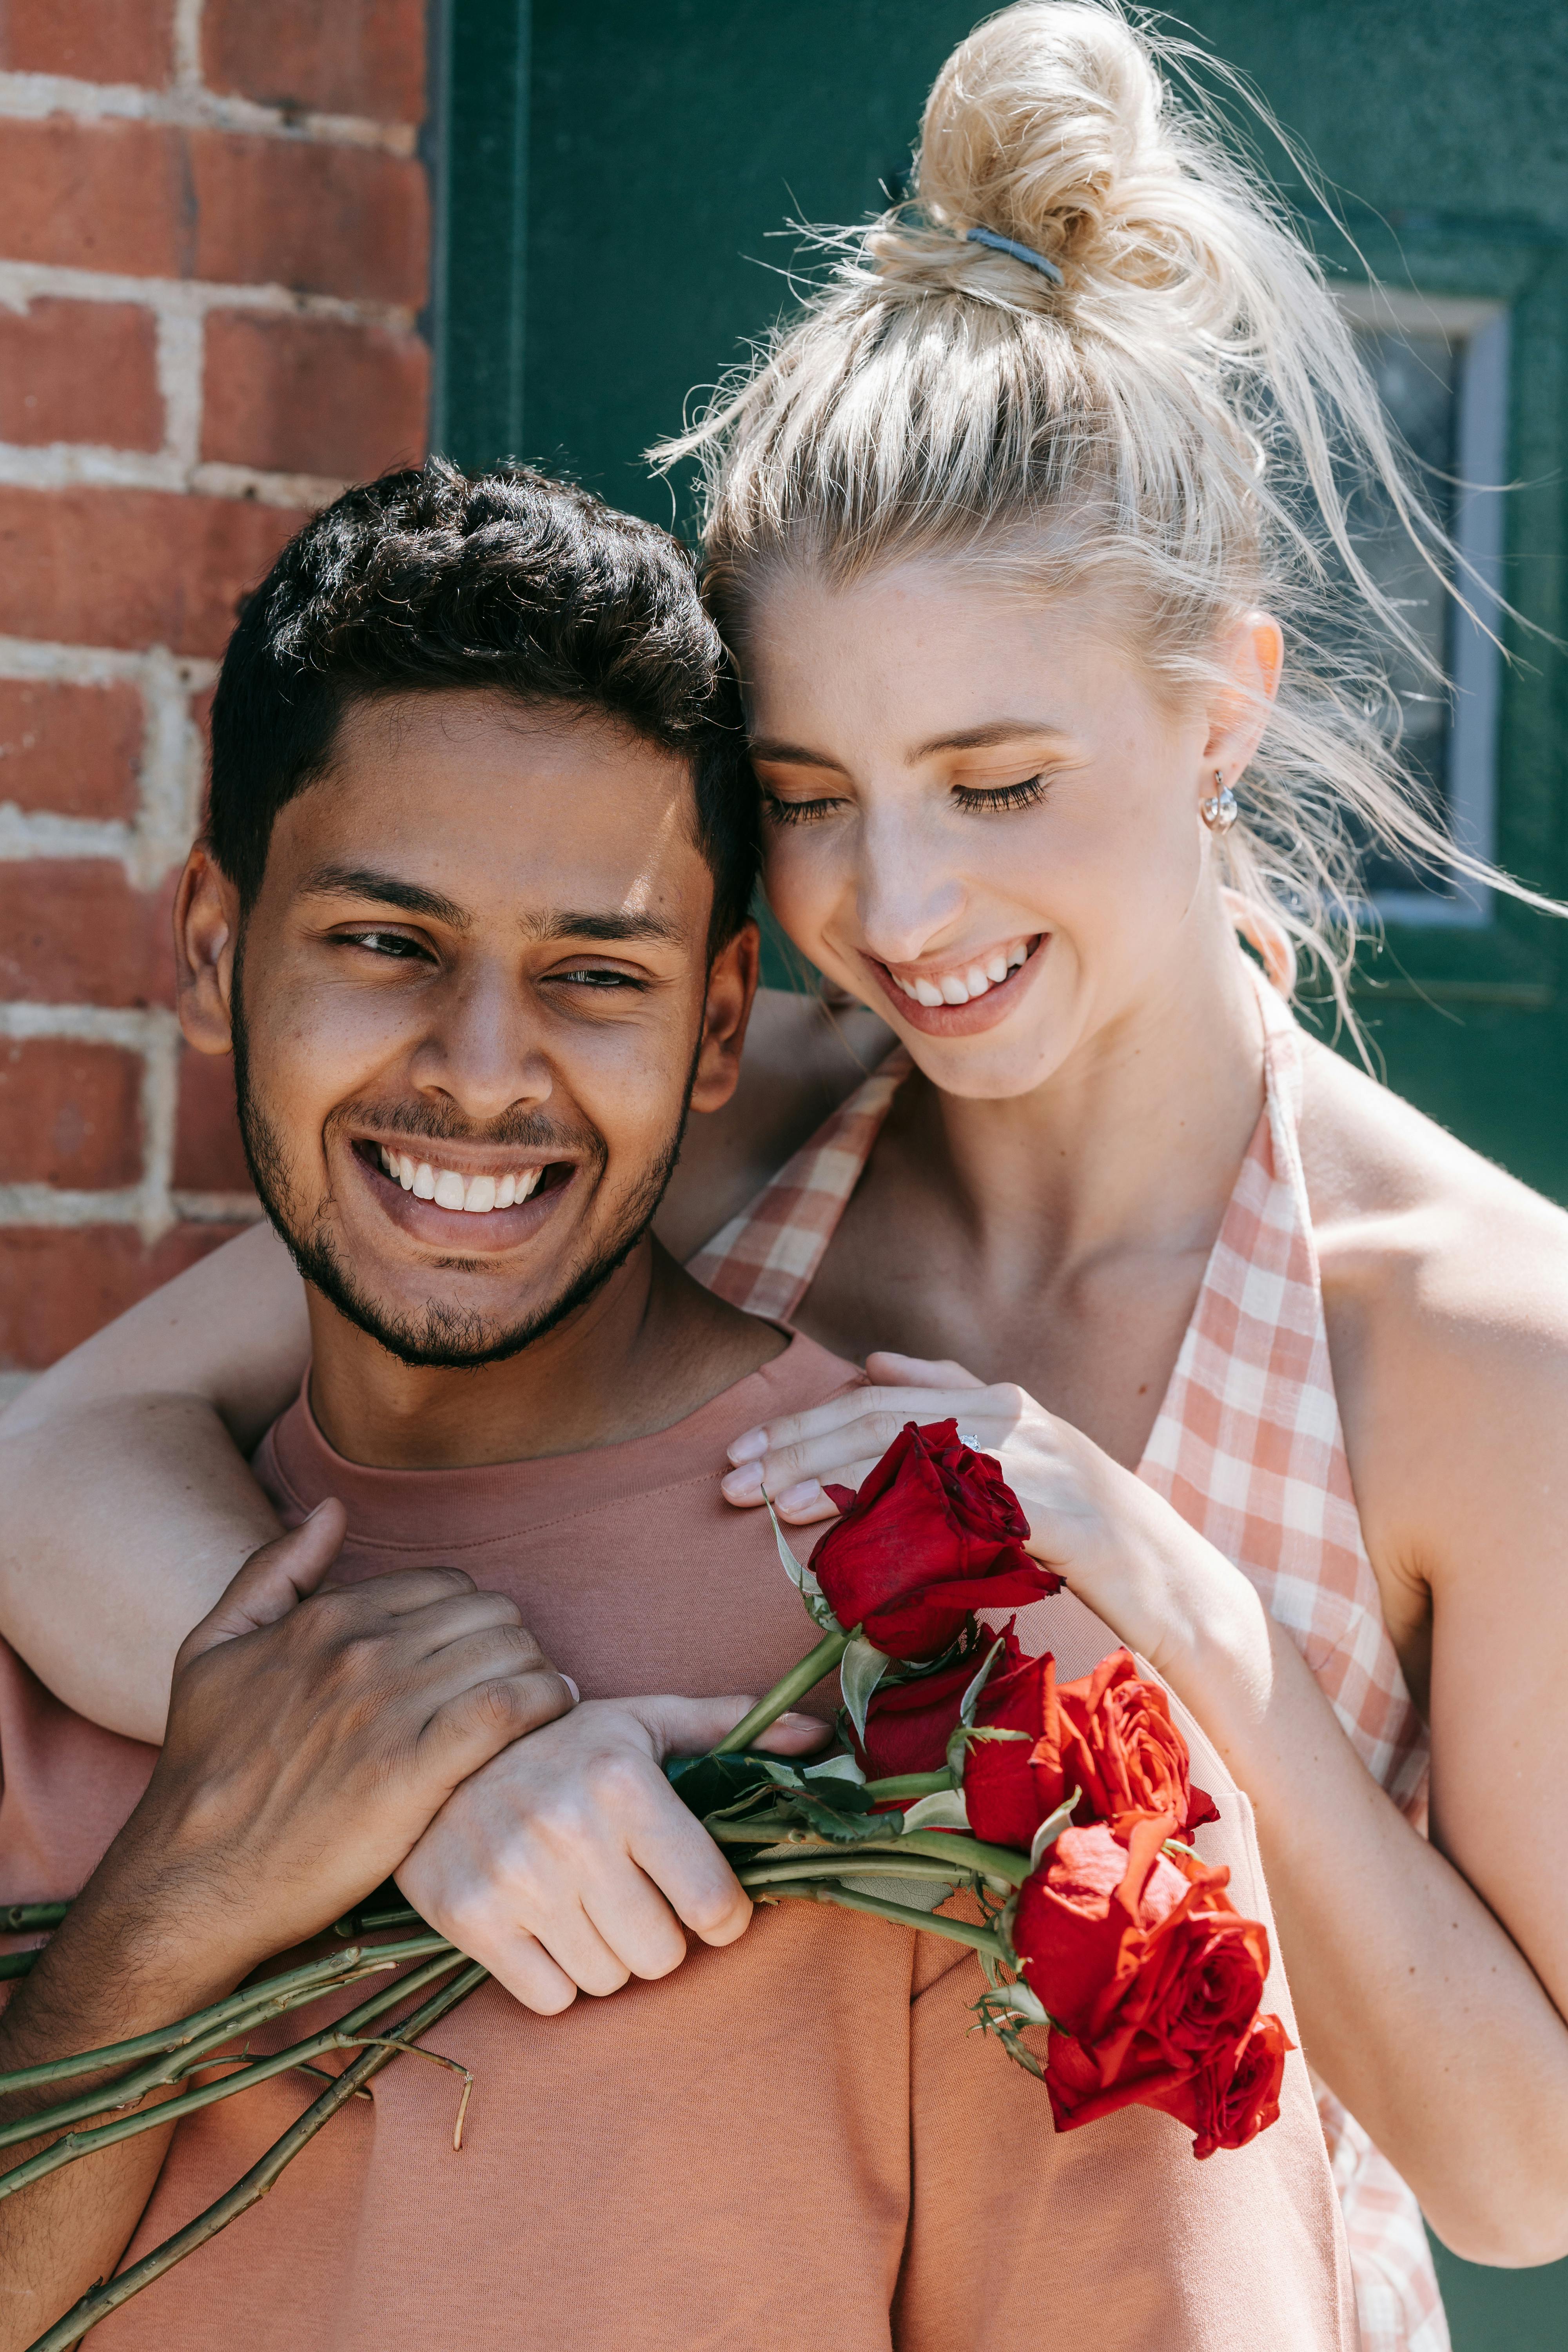 zeeshan zs on LinkedIn: Create Happy Valentine's Day AI Images of Couples  on Rose Day and Propose…